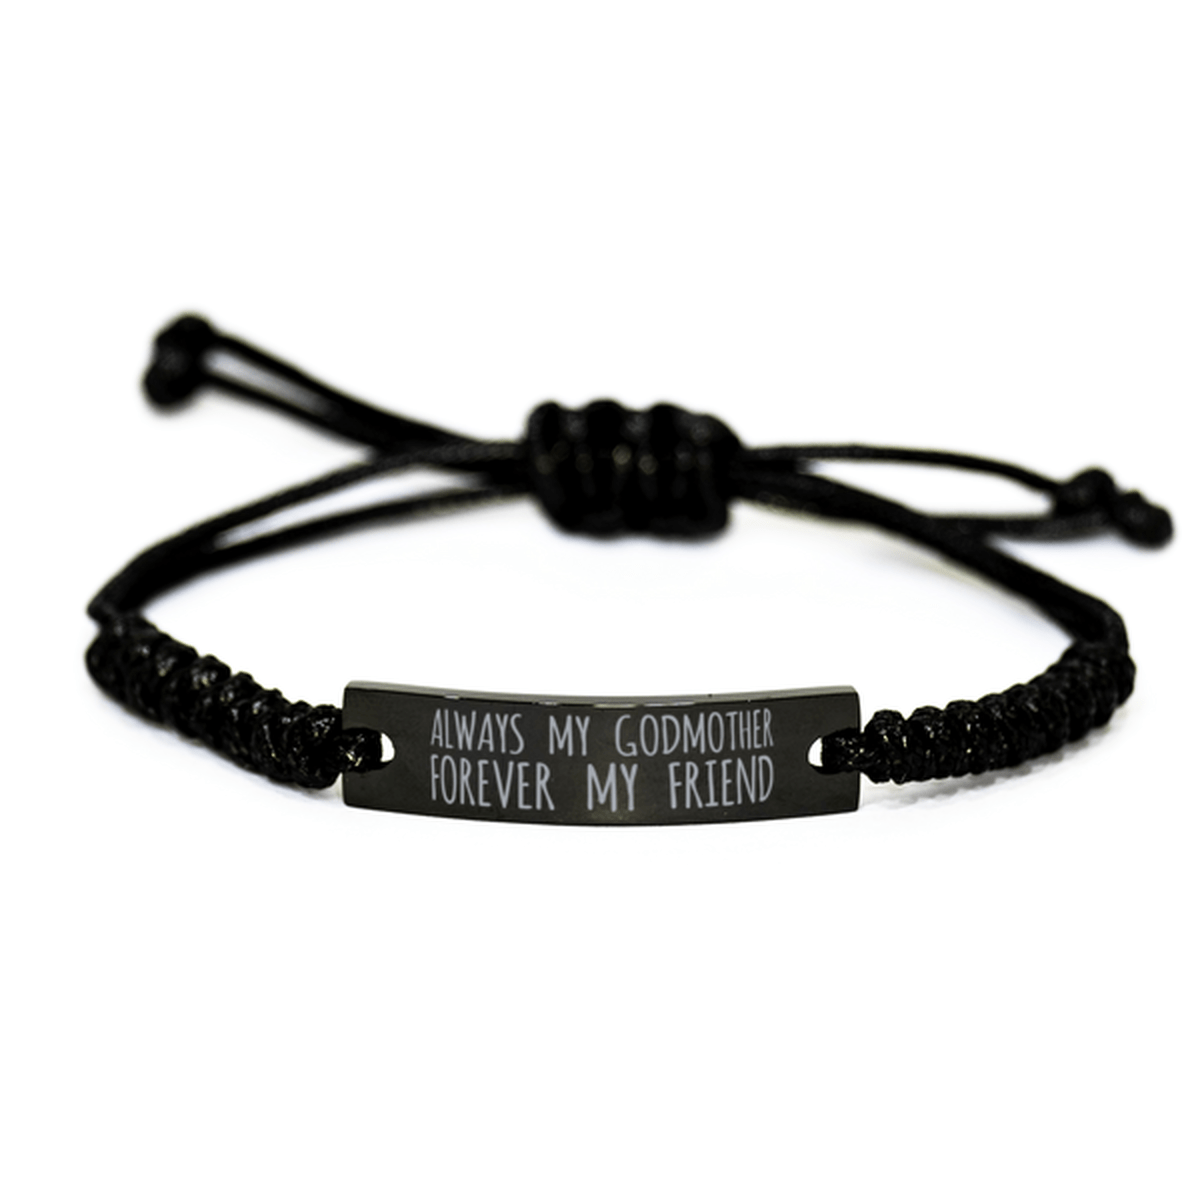 Inspirational Godmother Black Rope Bracelet, Always My Godmother Forever My Friend, Best Birthday Gifts For Family